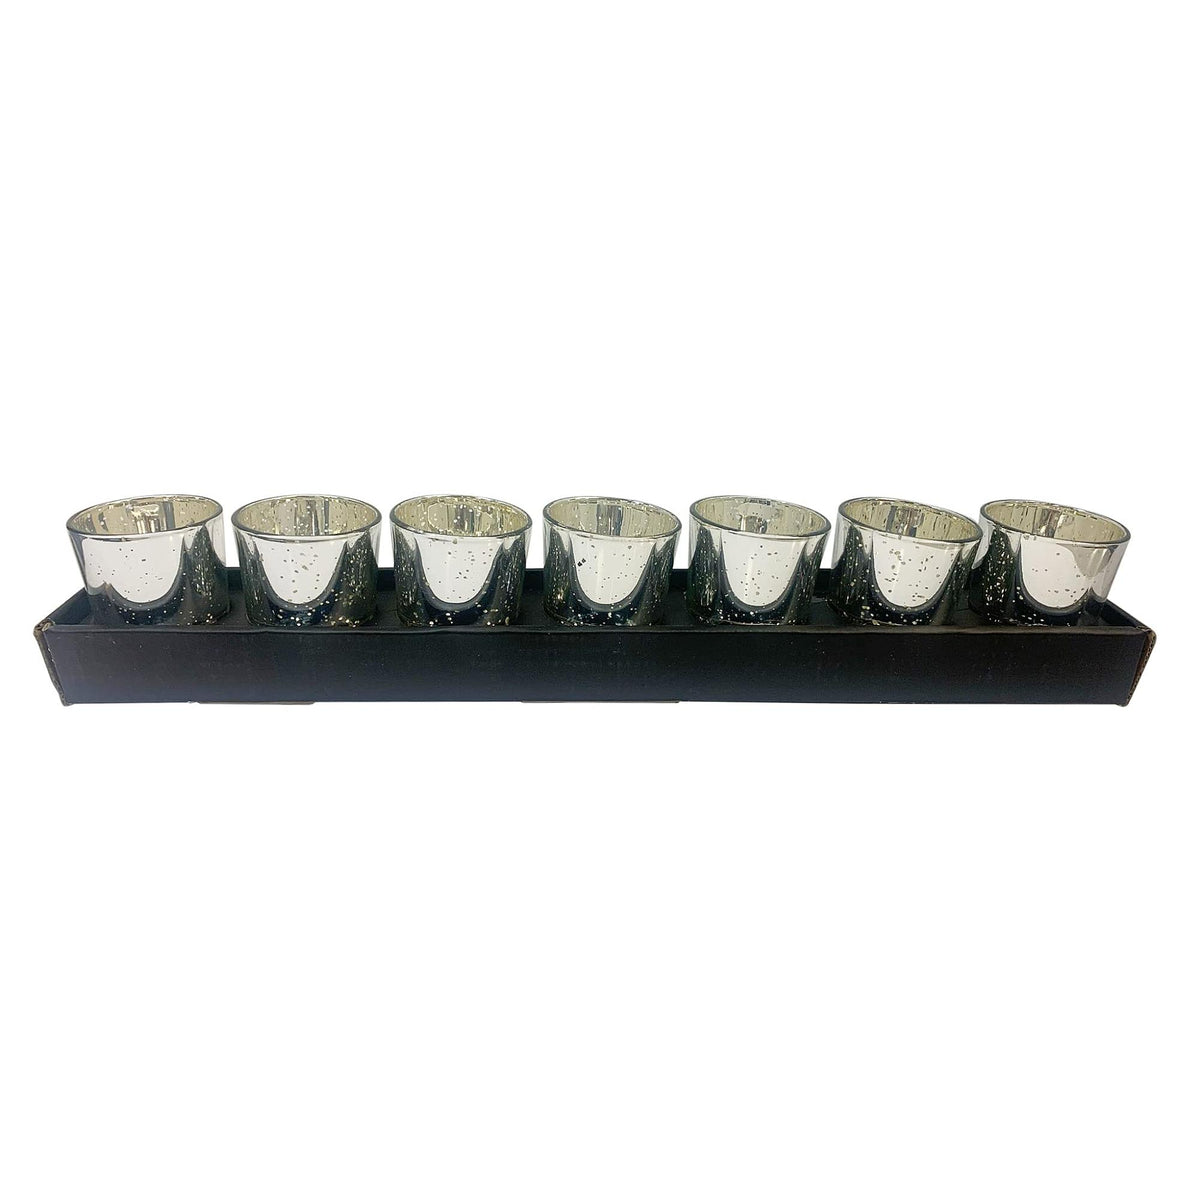 HOSLEY®  Glass Tea Light Candle Holder, Metallic Silver Finish, Set of 7,  2.65inches High each